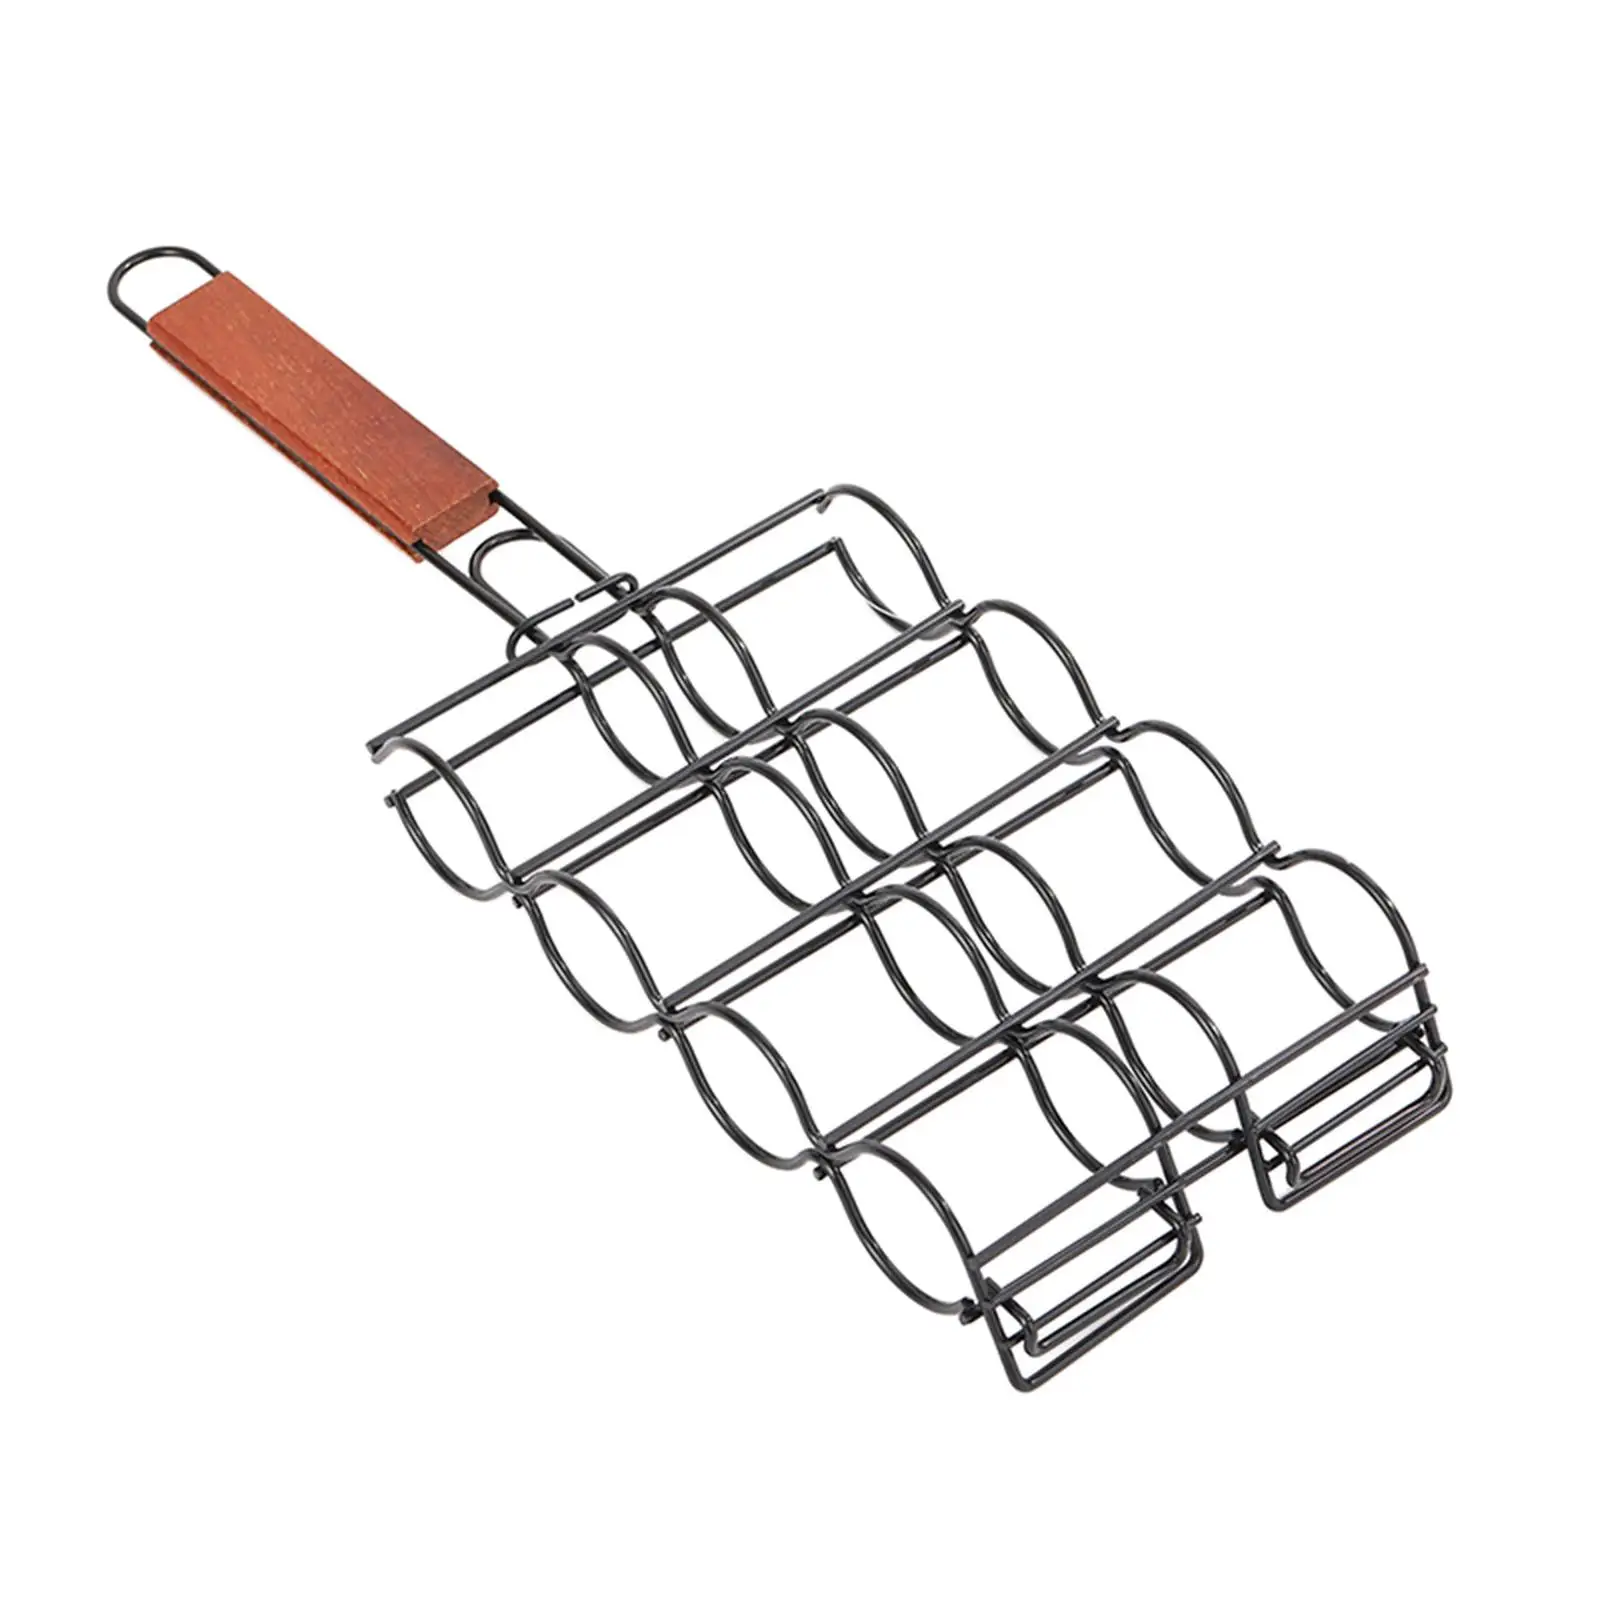 Corns Grilling Holder Sausage Grill Rack with Handle Grill Basket Grill Accessories Clip Net Rack Metal Mesh Baskets for Picnic